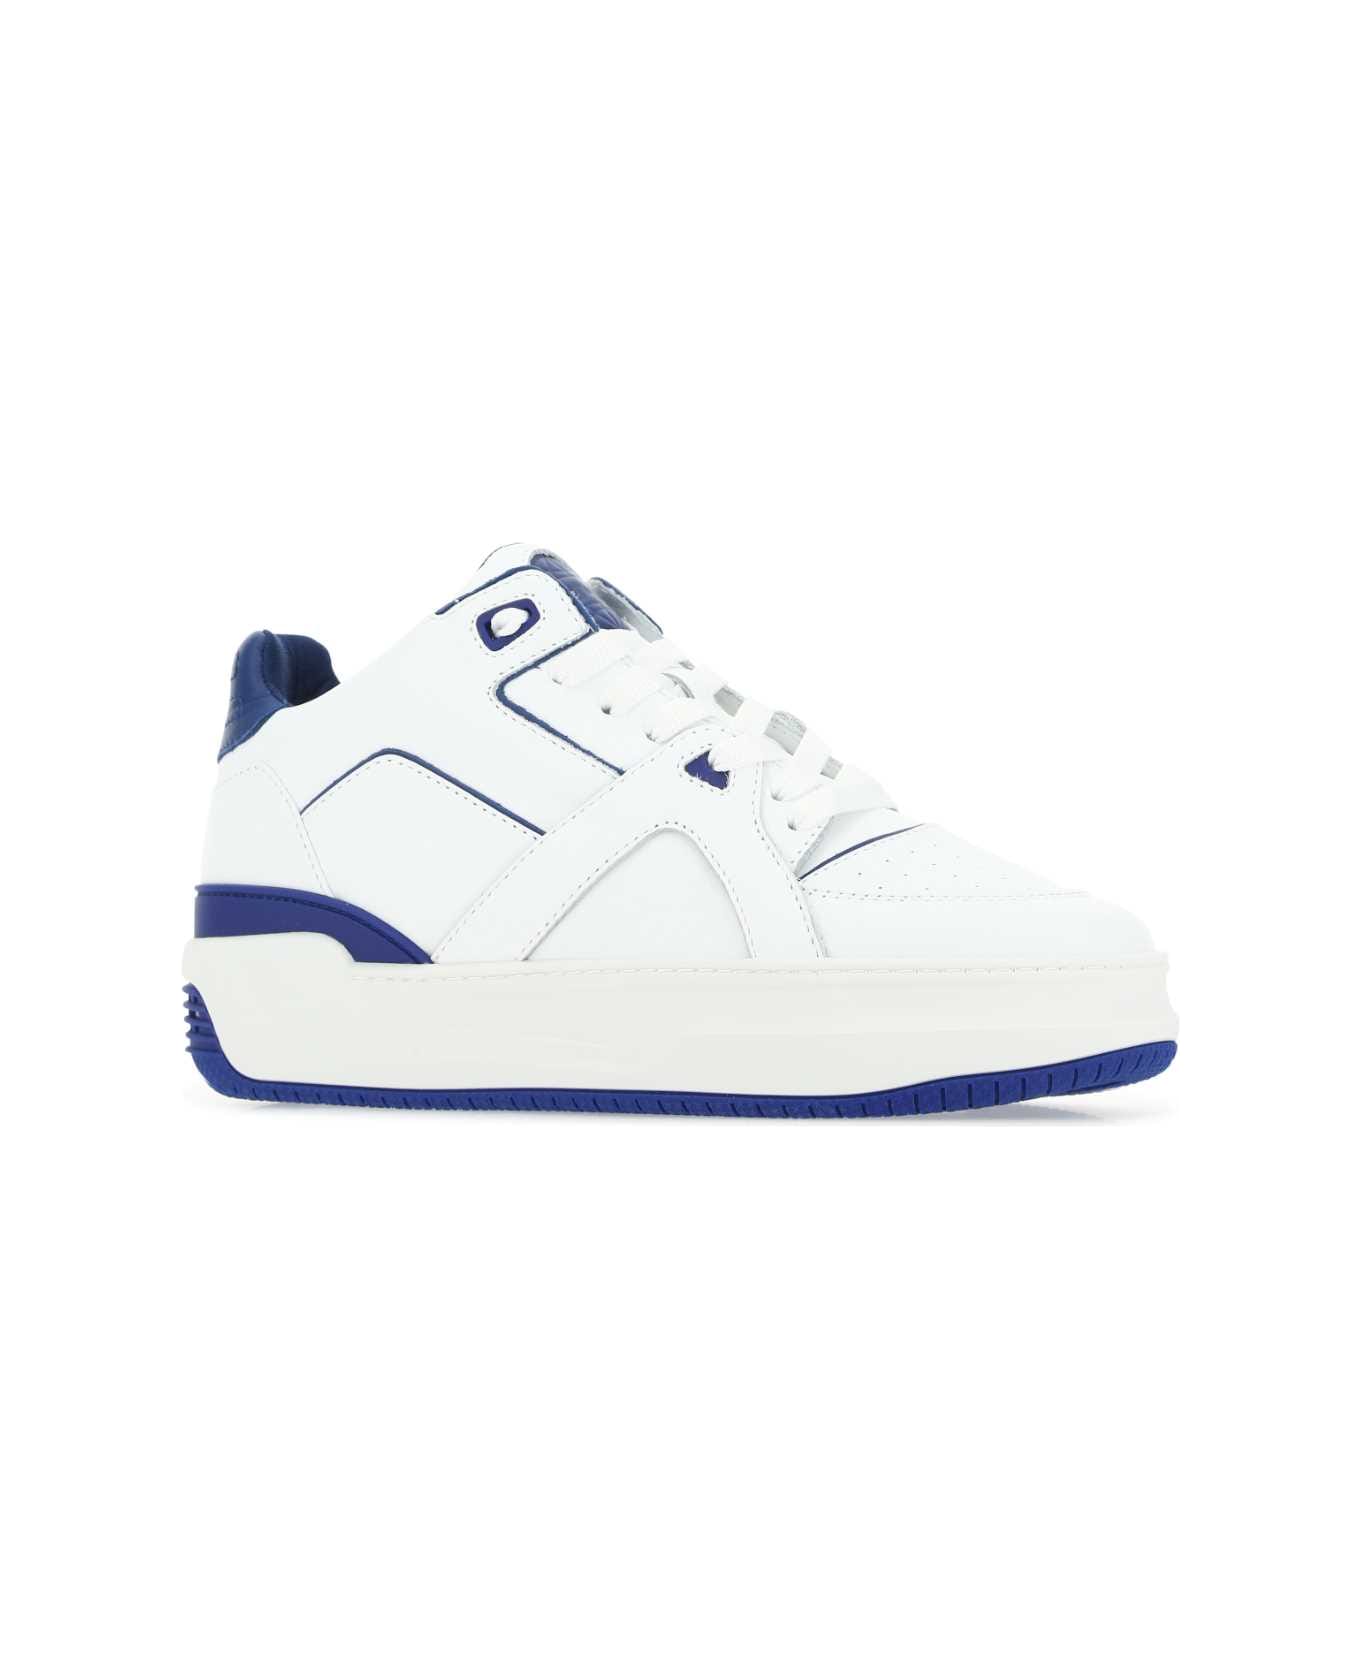 Just Don Two-tone Leather Courtside Lo Jd3 Sneakers - 85 スニーカー